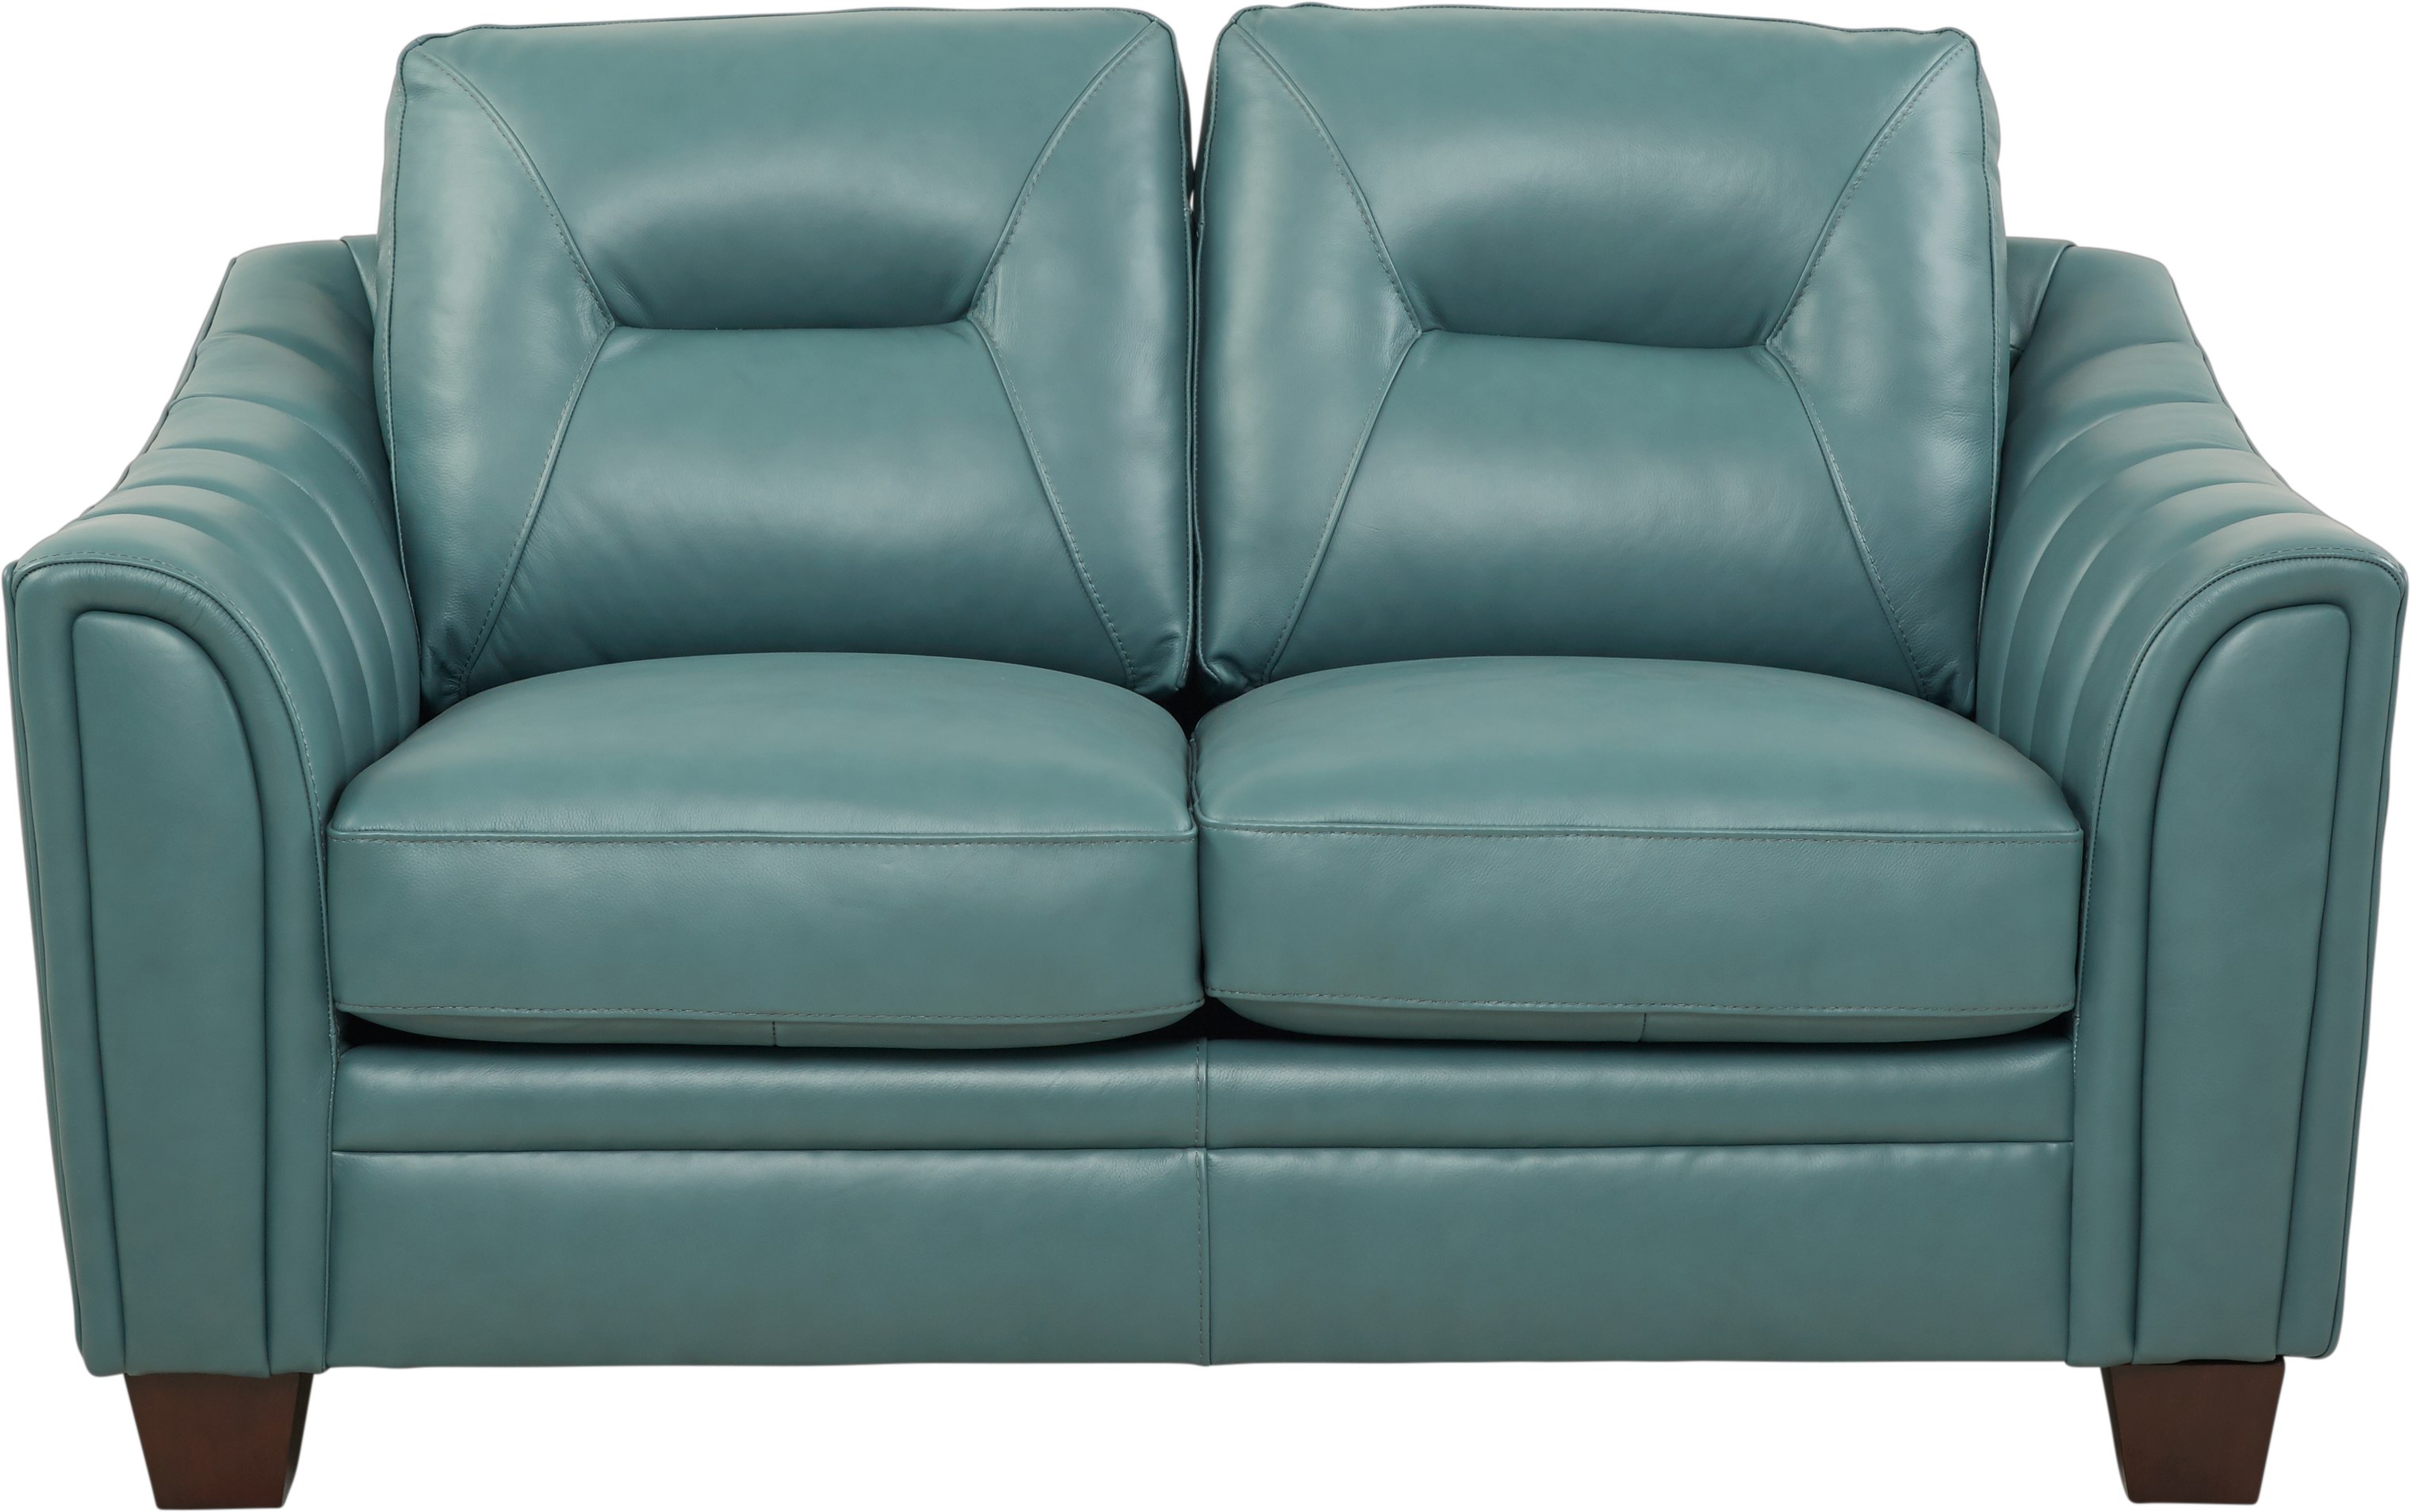 Cindy Crawford Home San Martino Teal Leather Loveseat - Leather Loveseats  (Blue)